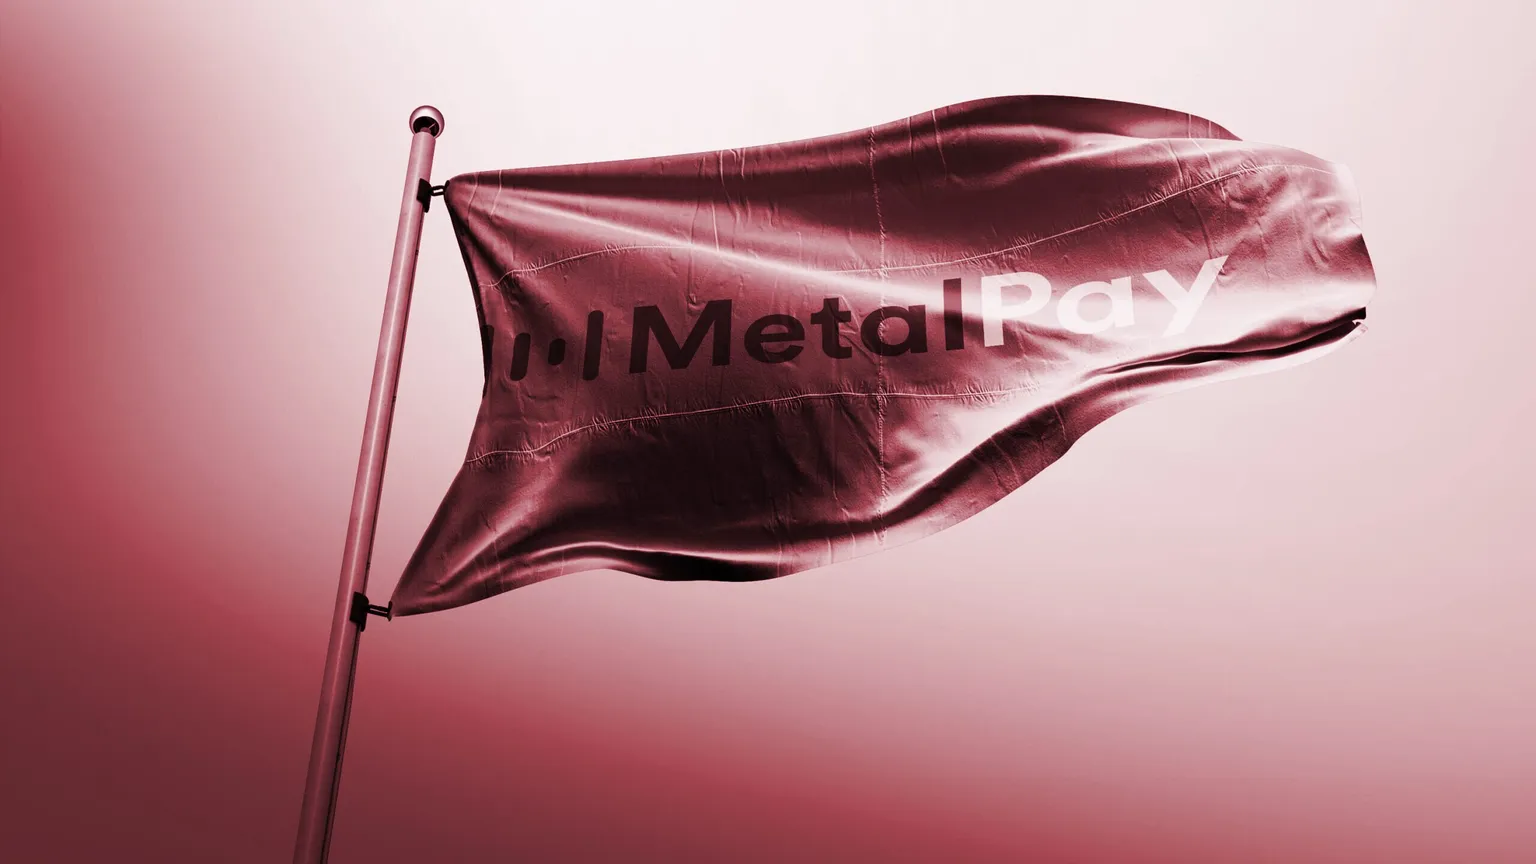 Metal Pay has applied for a federal banking charter. Image: Shutterstock